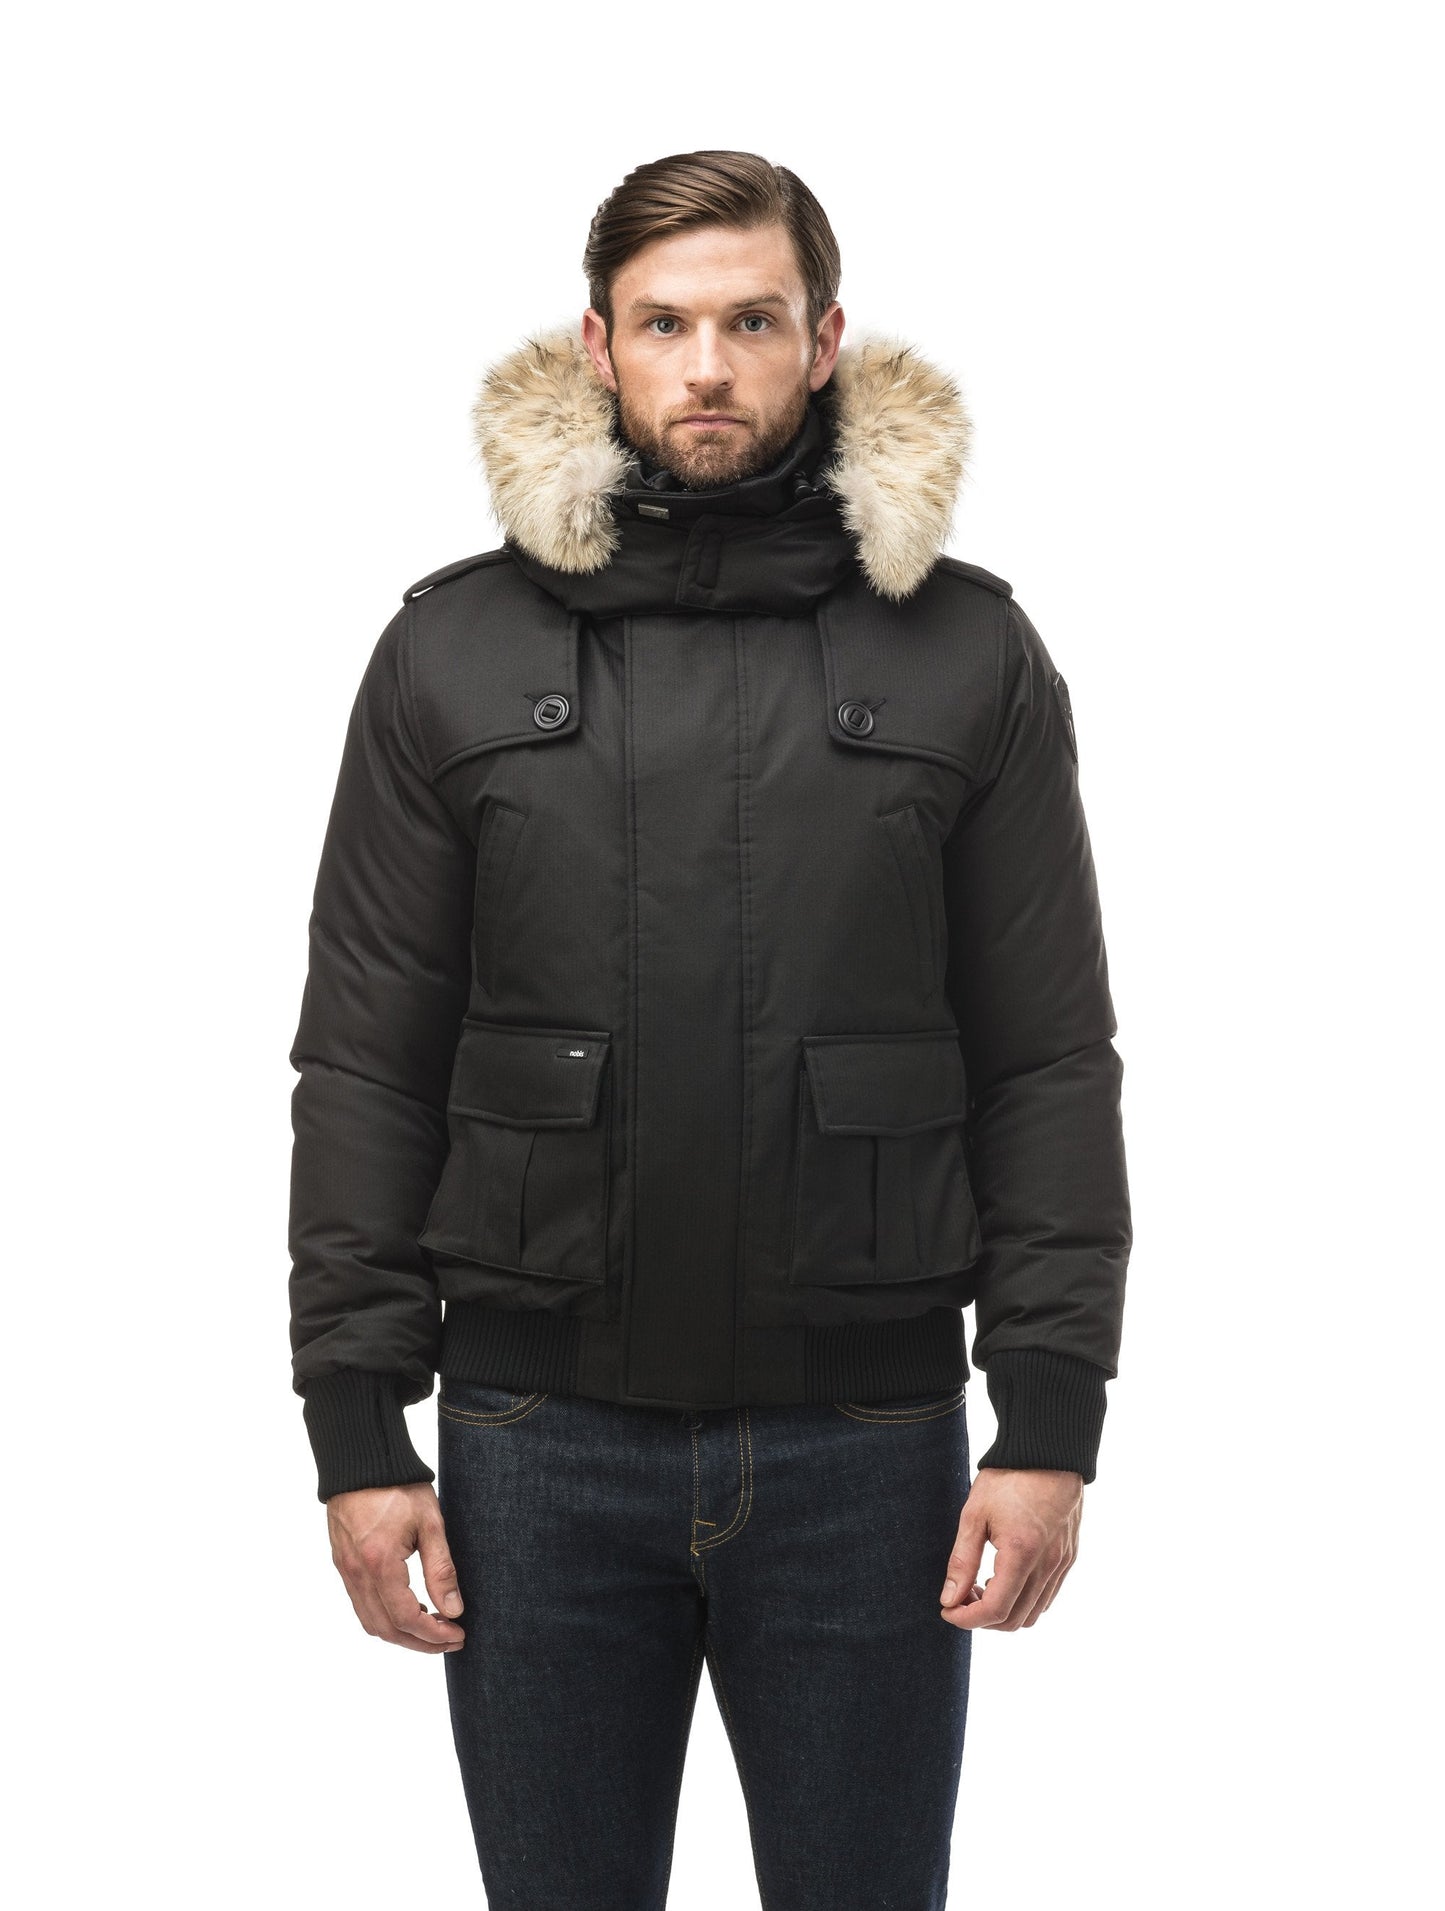 Men's down filled bomber that sits just above the hips with a completely removable hood that's windproof, waterproof, and breathable in CH Black